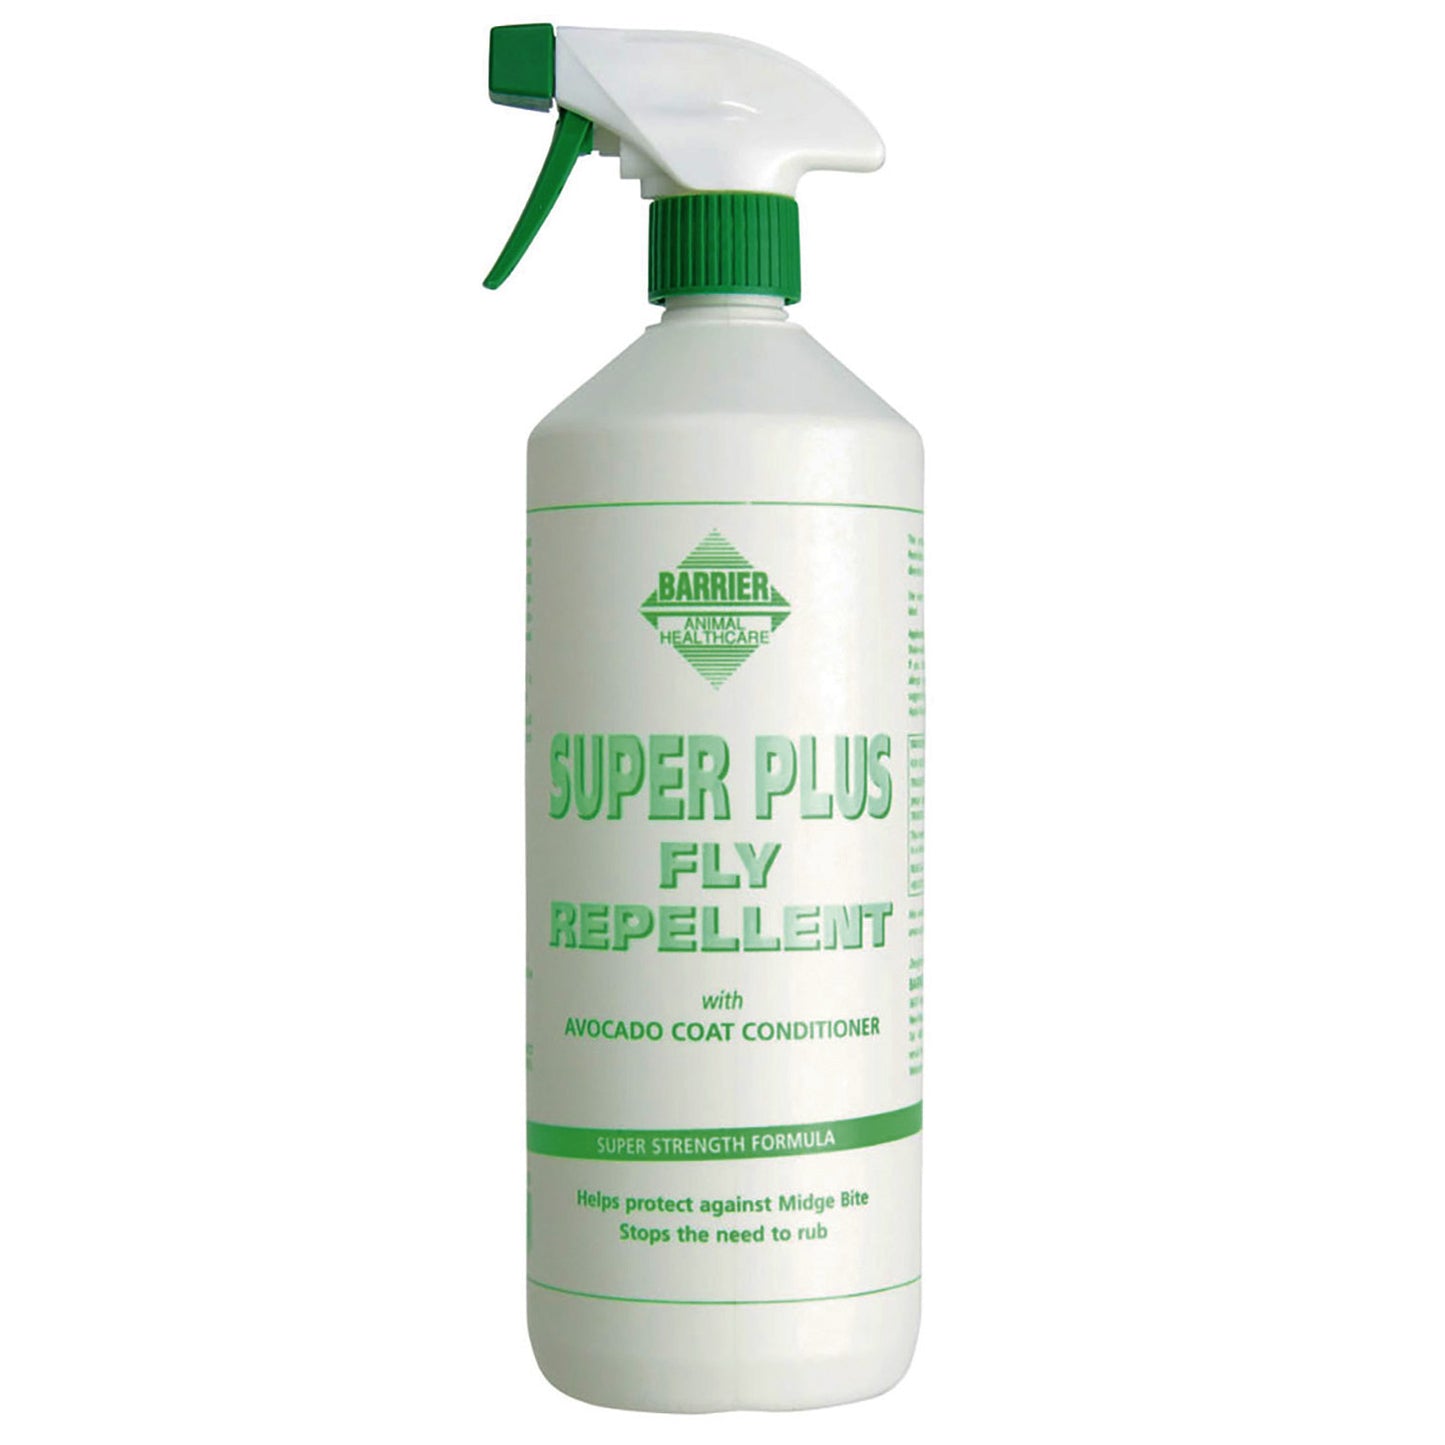 Barrier Super Plus Fly Repellent with Trigger Sprayer